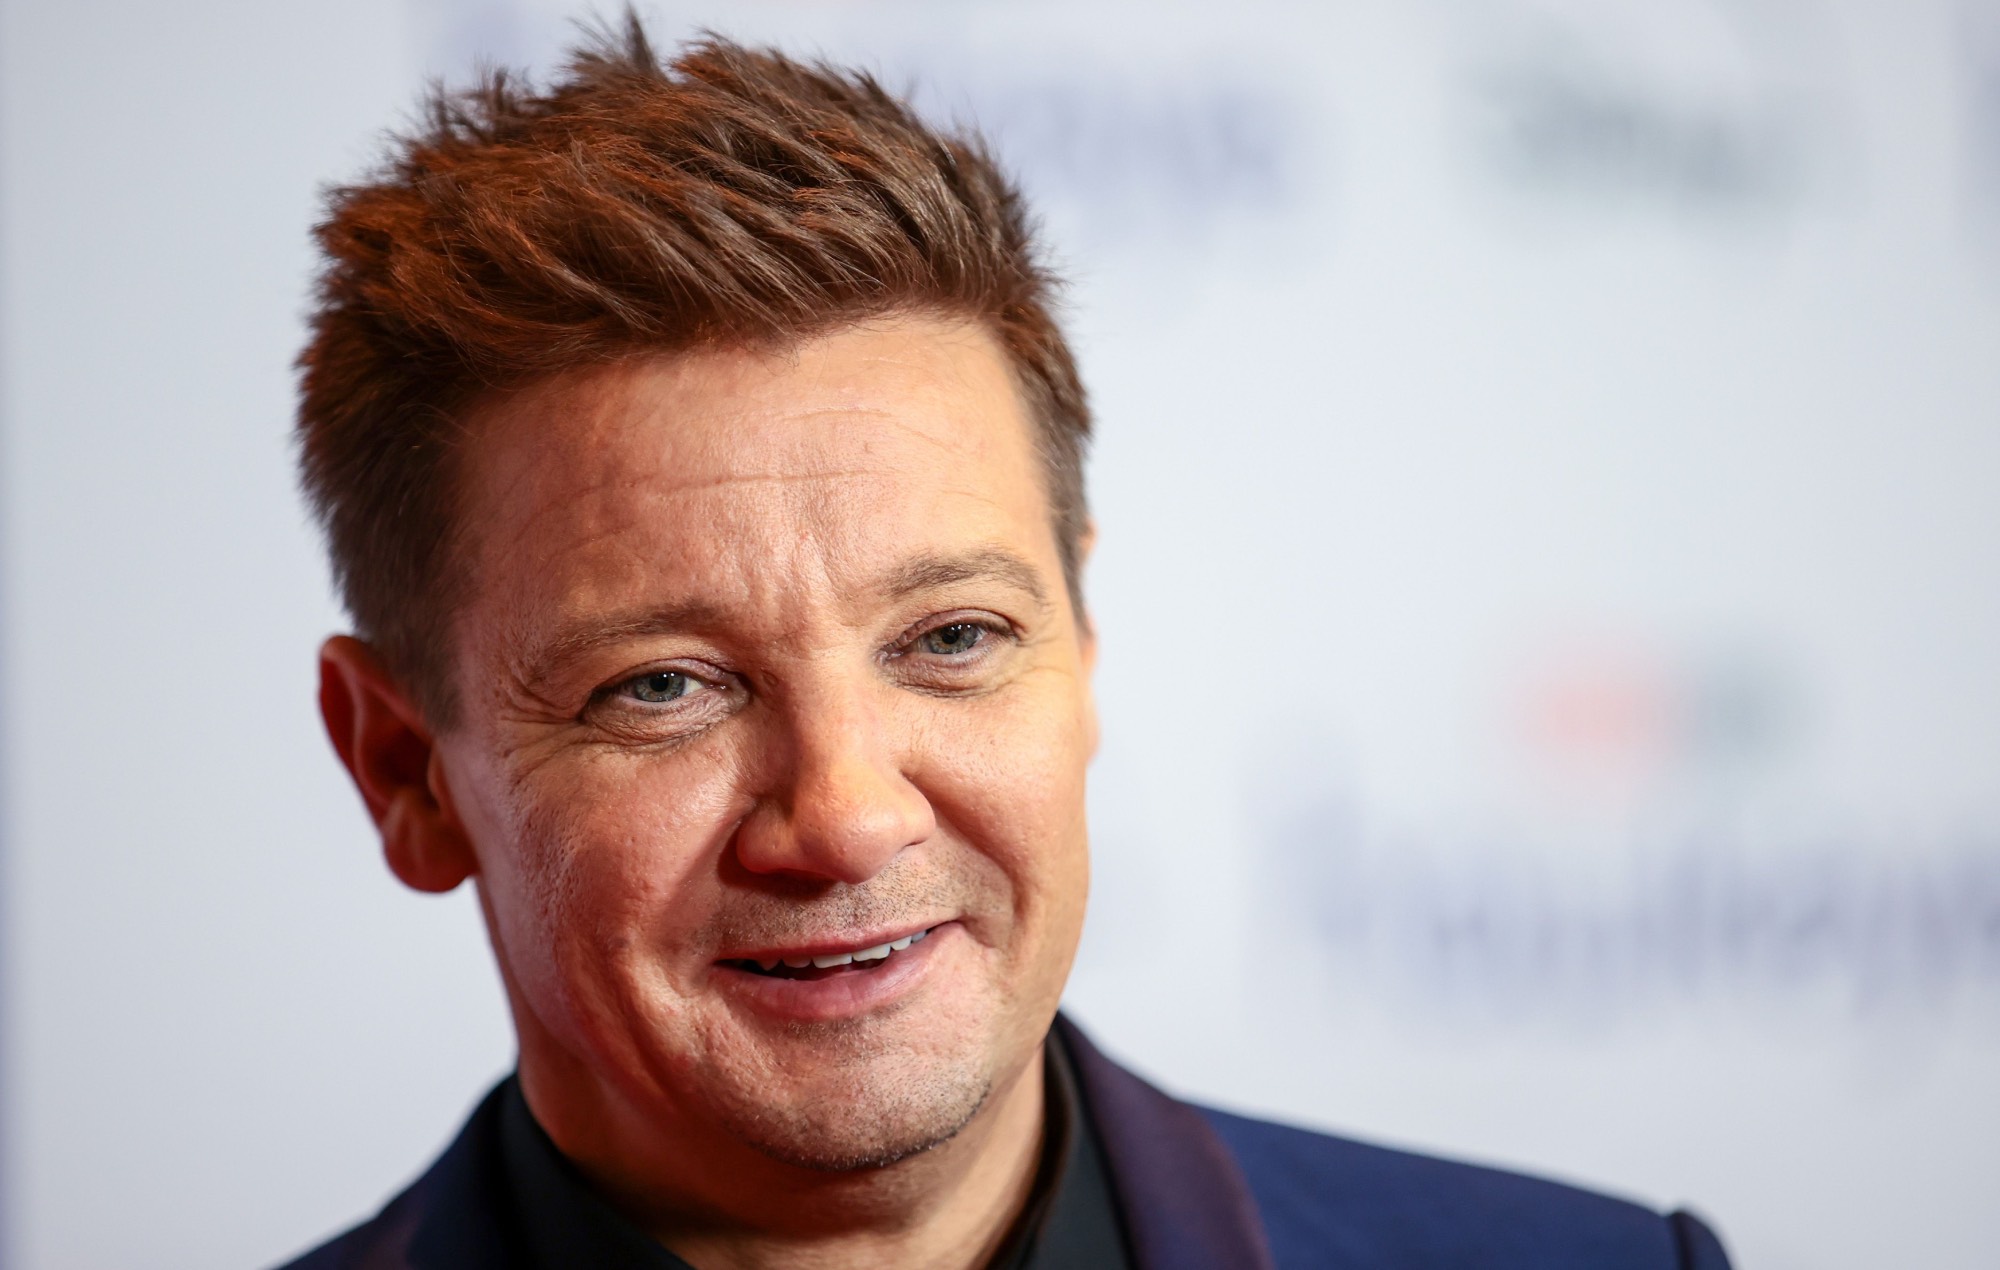 Jeremy Renner has tried “every type of therapy” since snow plow accident